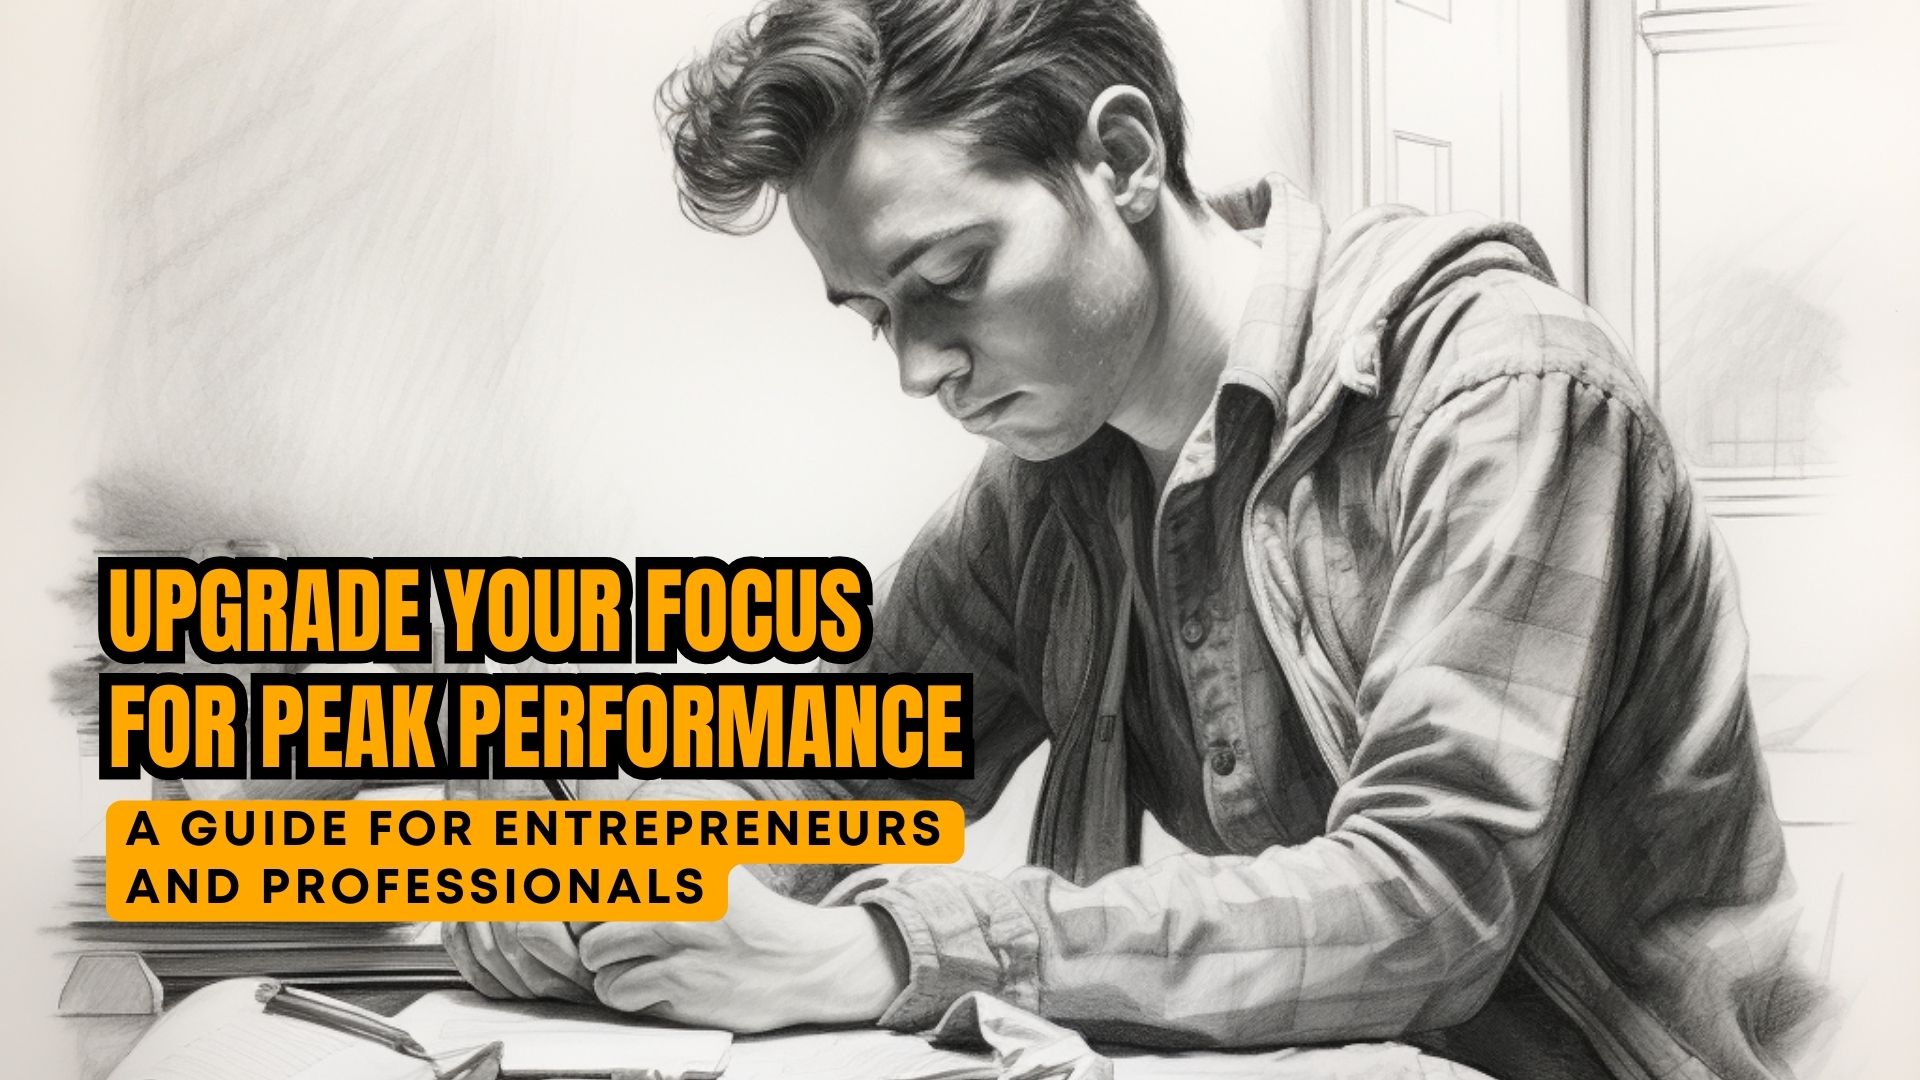 Upgrade Your Focus for Peak Performance: A Guide for Entrepreneurs and Professionals